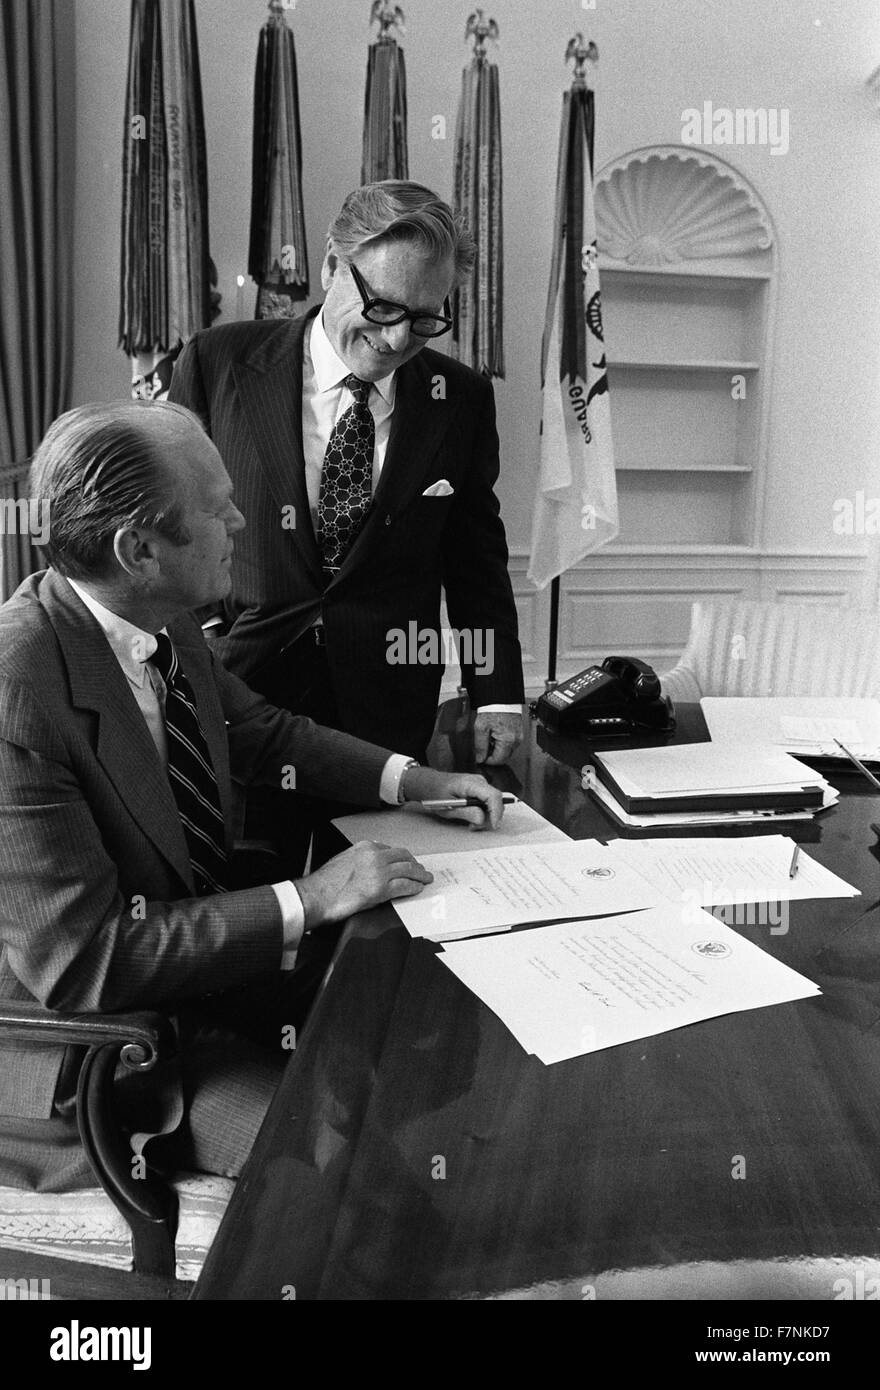 Gerald Ford and Nelson Rockefeller in the Oval office, 1974. Nelson Aldrich Rockefeller (July 8, 1908 – January 26, 1979) was an American businessman, philanthropist, public servant, and politician. He served as the 41st Vice President of the United States (1974–1977) under President Gerald Ford, Stock Photo